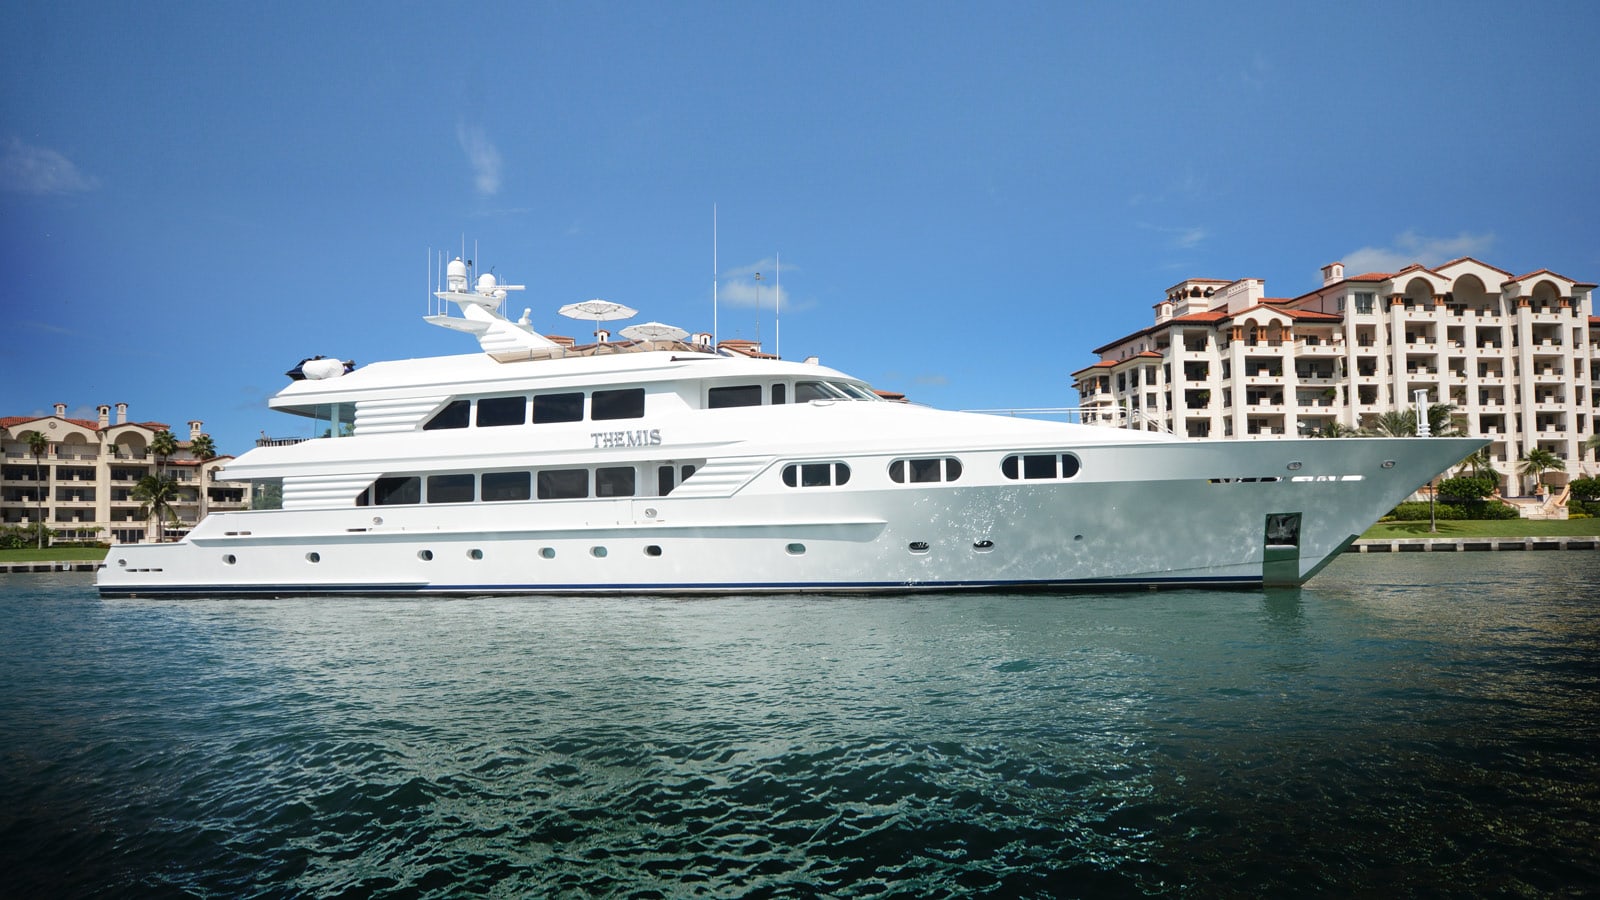 Themis Yacht Sold